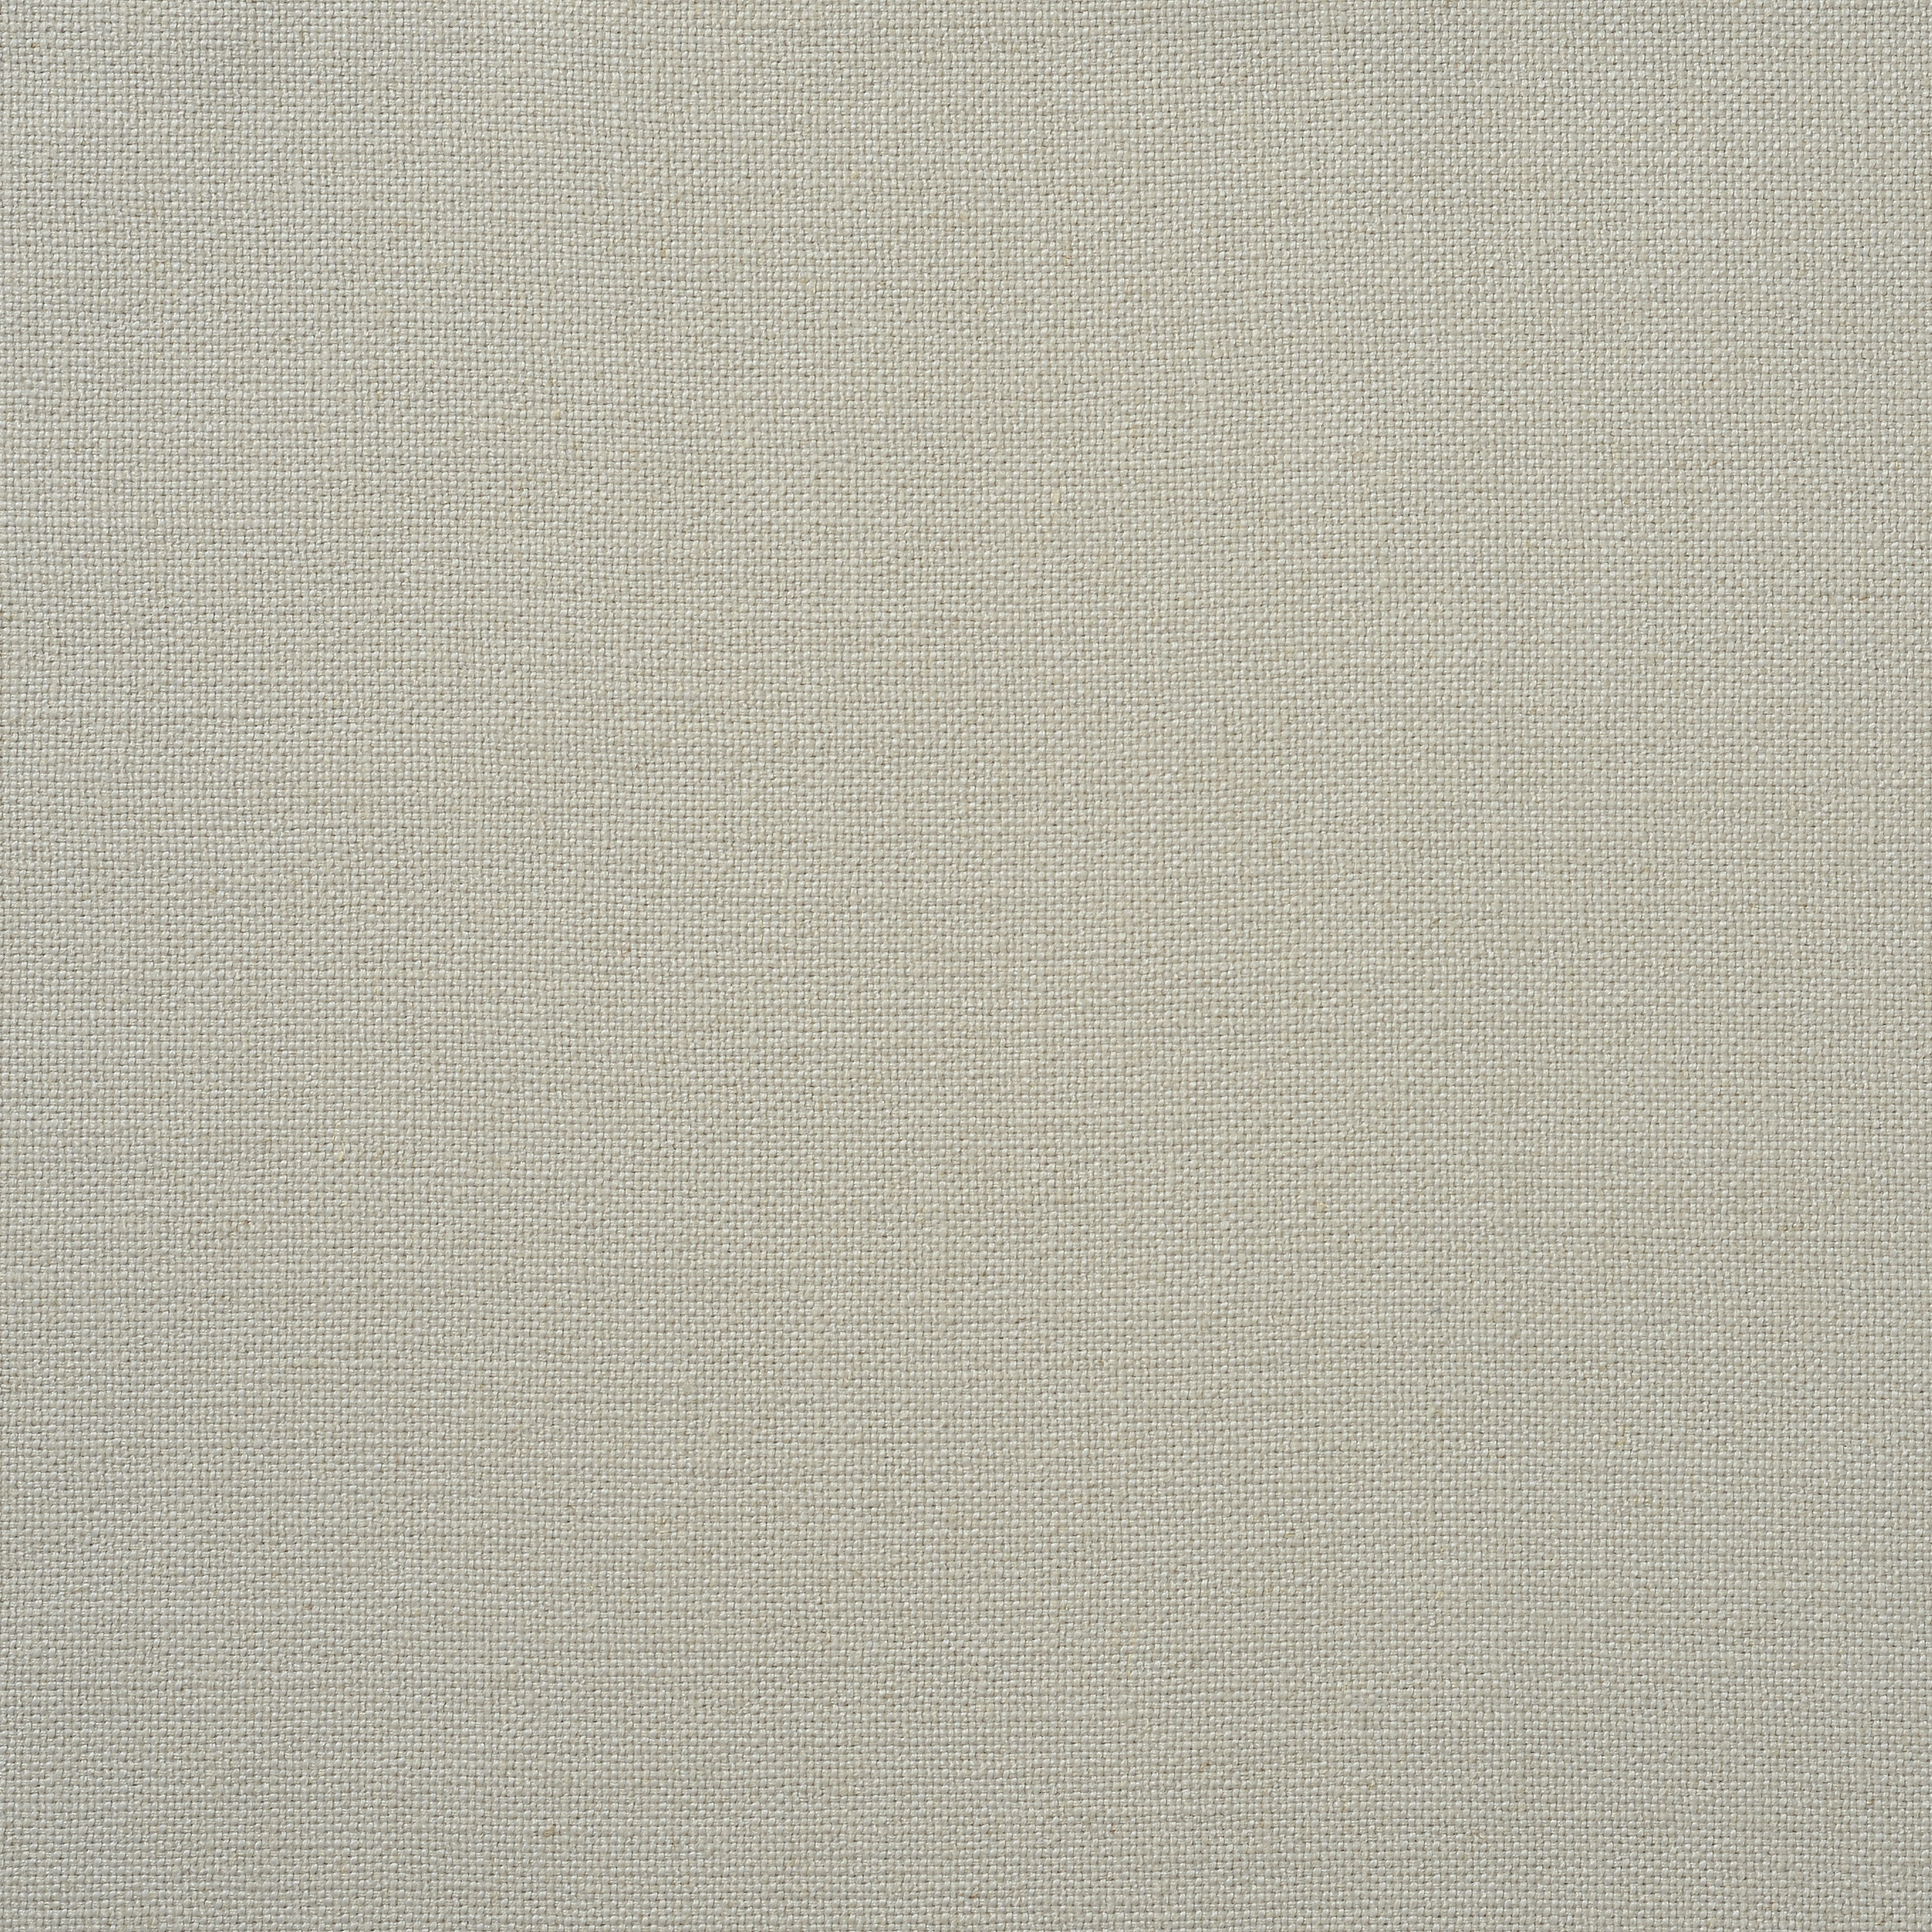 Harriet Easyclean Linen Mix - Lily White